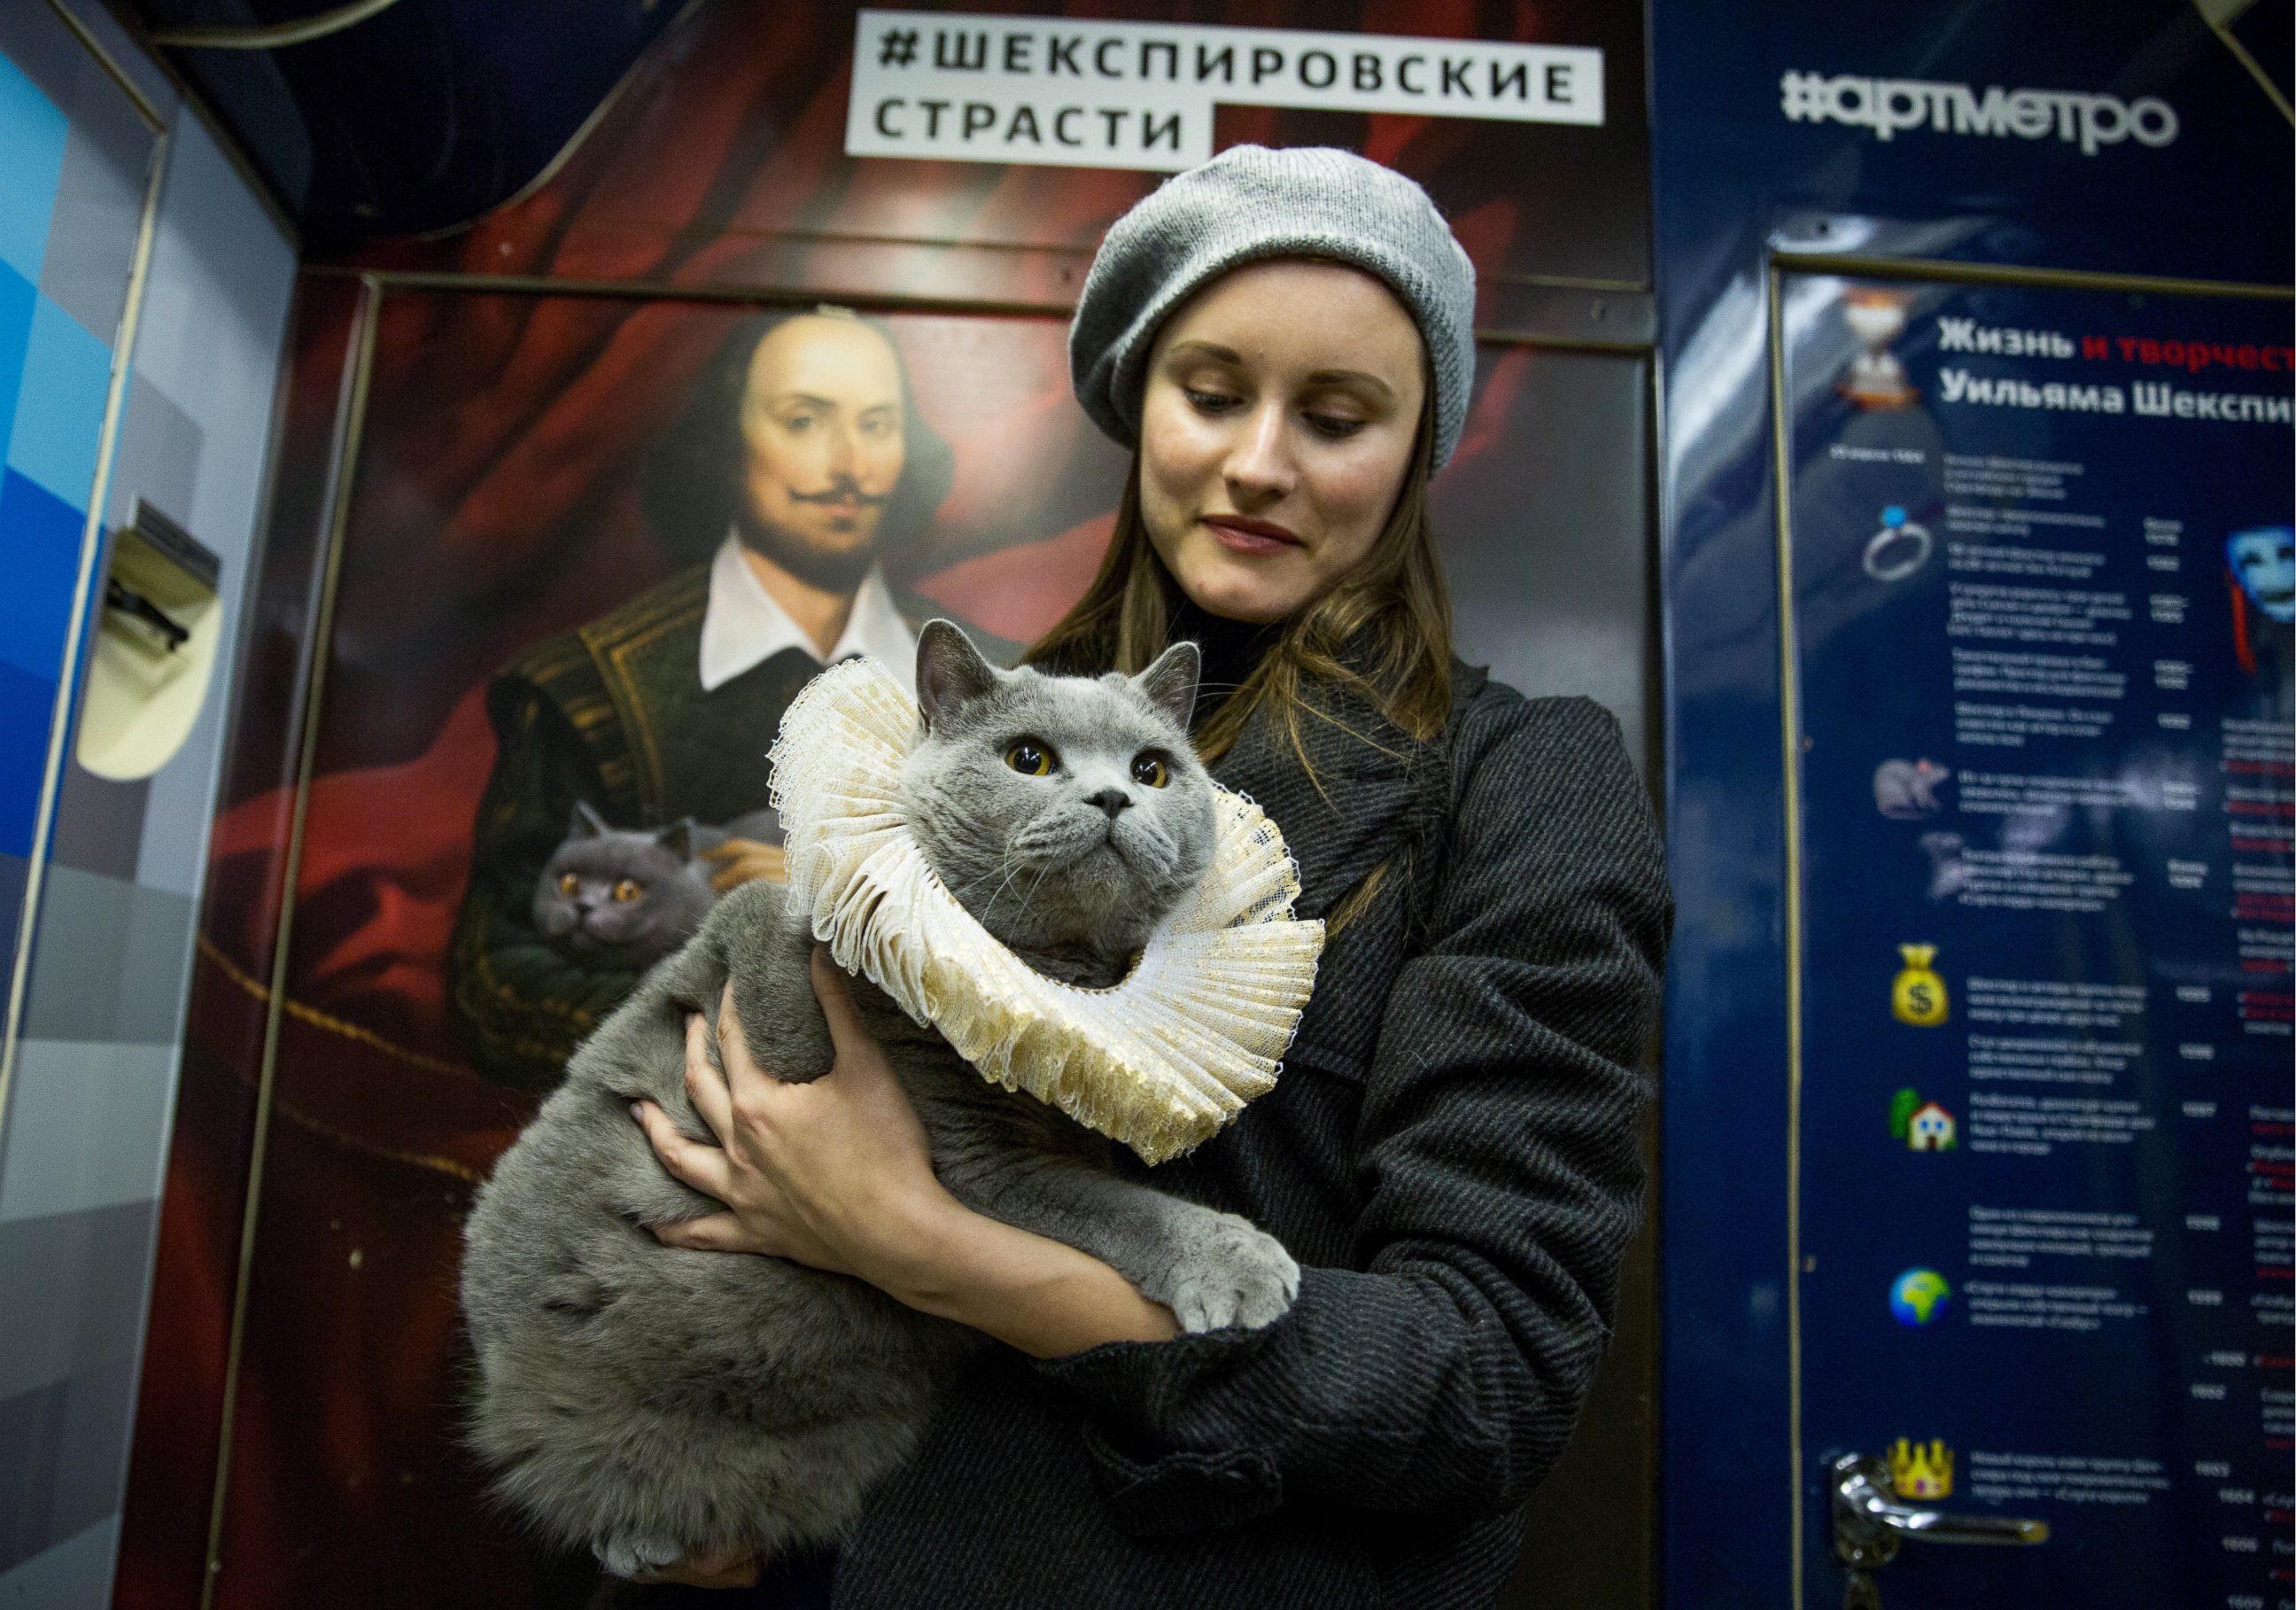 PHOTO: A British Shorthair cat in a car of a train marking the 400th anniversary of William Shakespeare's death put into service on the Arbatsko-Pokrovskaya Line of the Moscow Metro, Oct. 12, 2016.